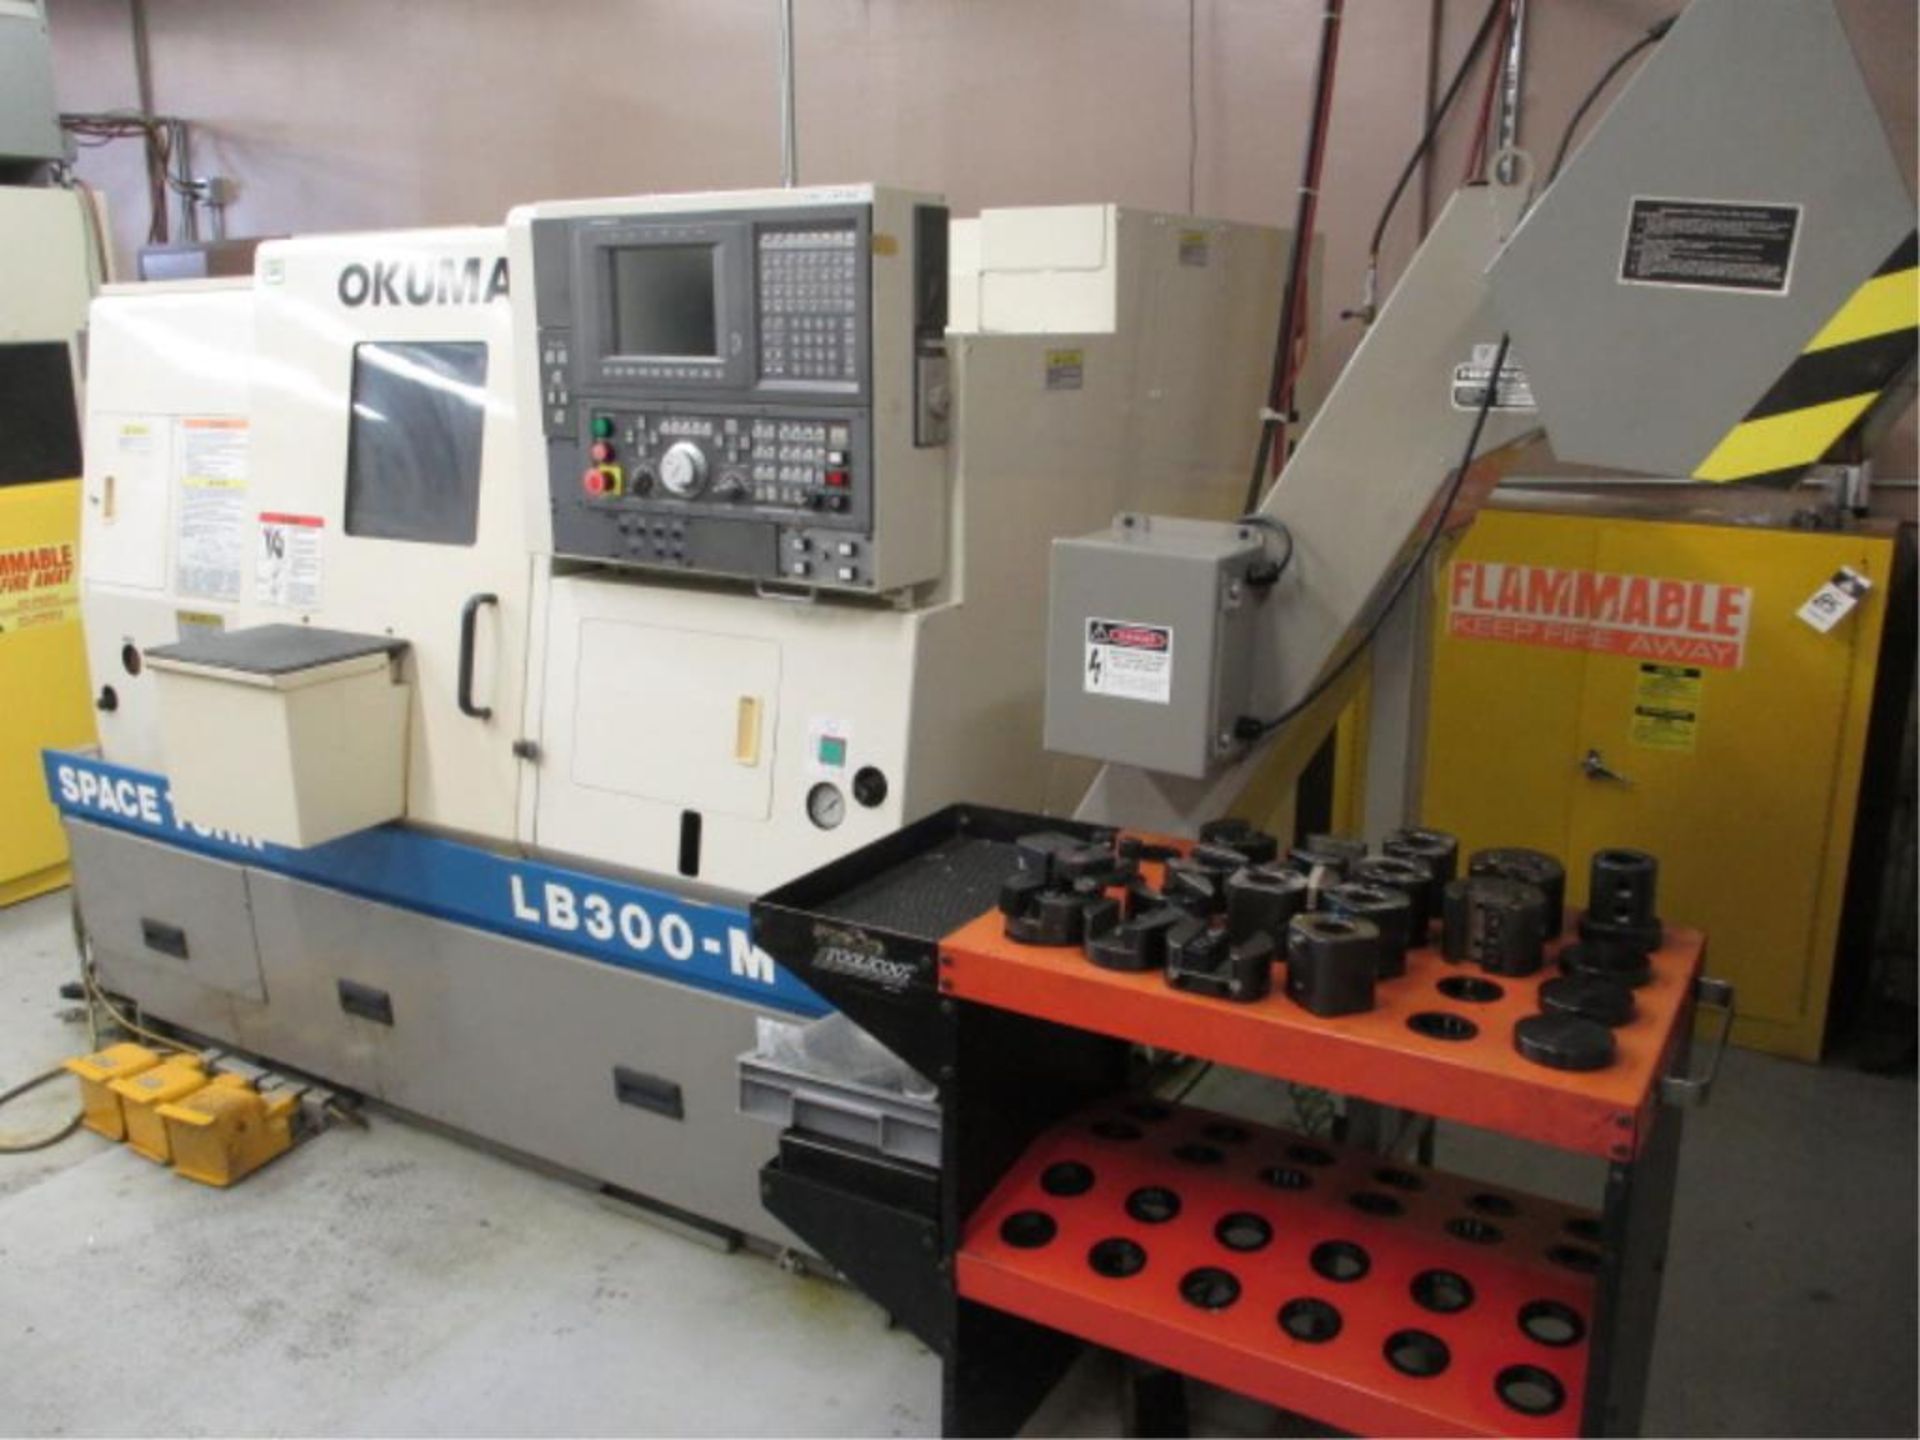 Turning Center. 1998 Okuma Space Turn LB300-M 3-Axis CNC Turning Center with Live Tool Turret, 8.25" - Image 4 of 9